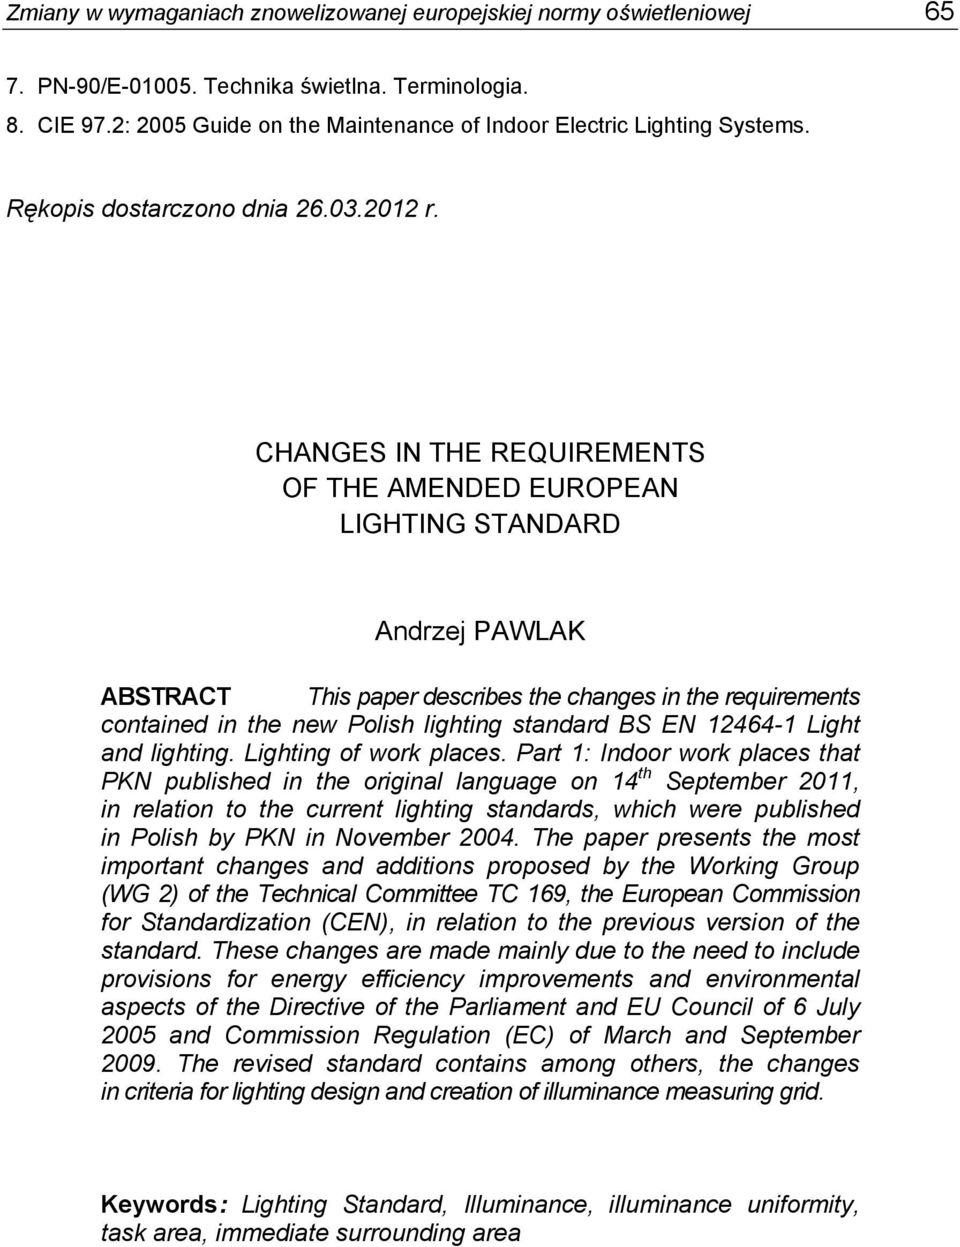 CHANGES IN THE REQUIREMENTS OF THE AMENDED EUROPEAN LIGHTING STANDARD Andrzej PAWLAK ABSTRACT This paper describes the changes in the requirements contained in the new Polish lighting standard BS EN